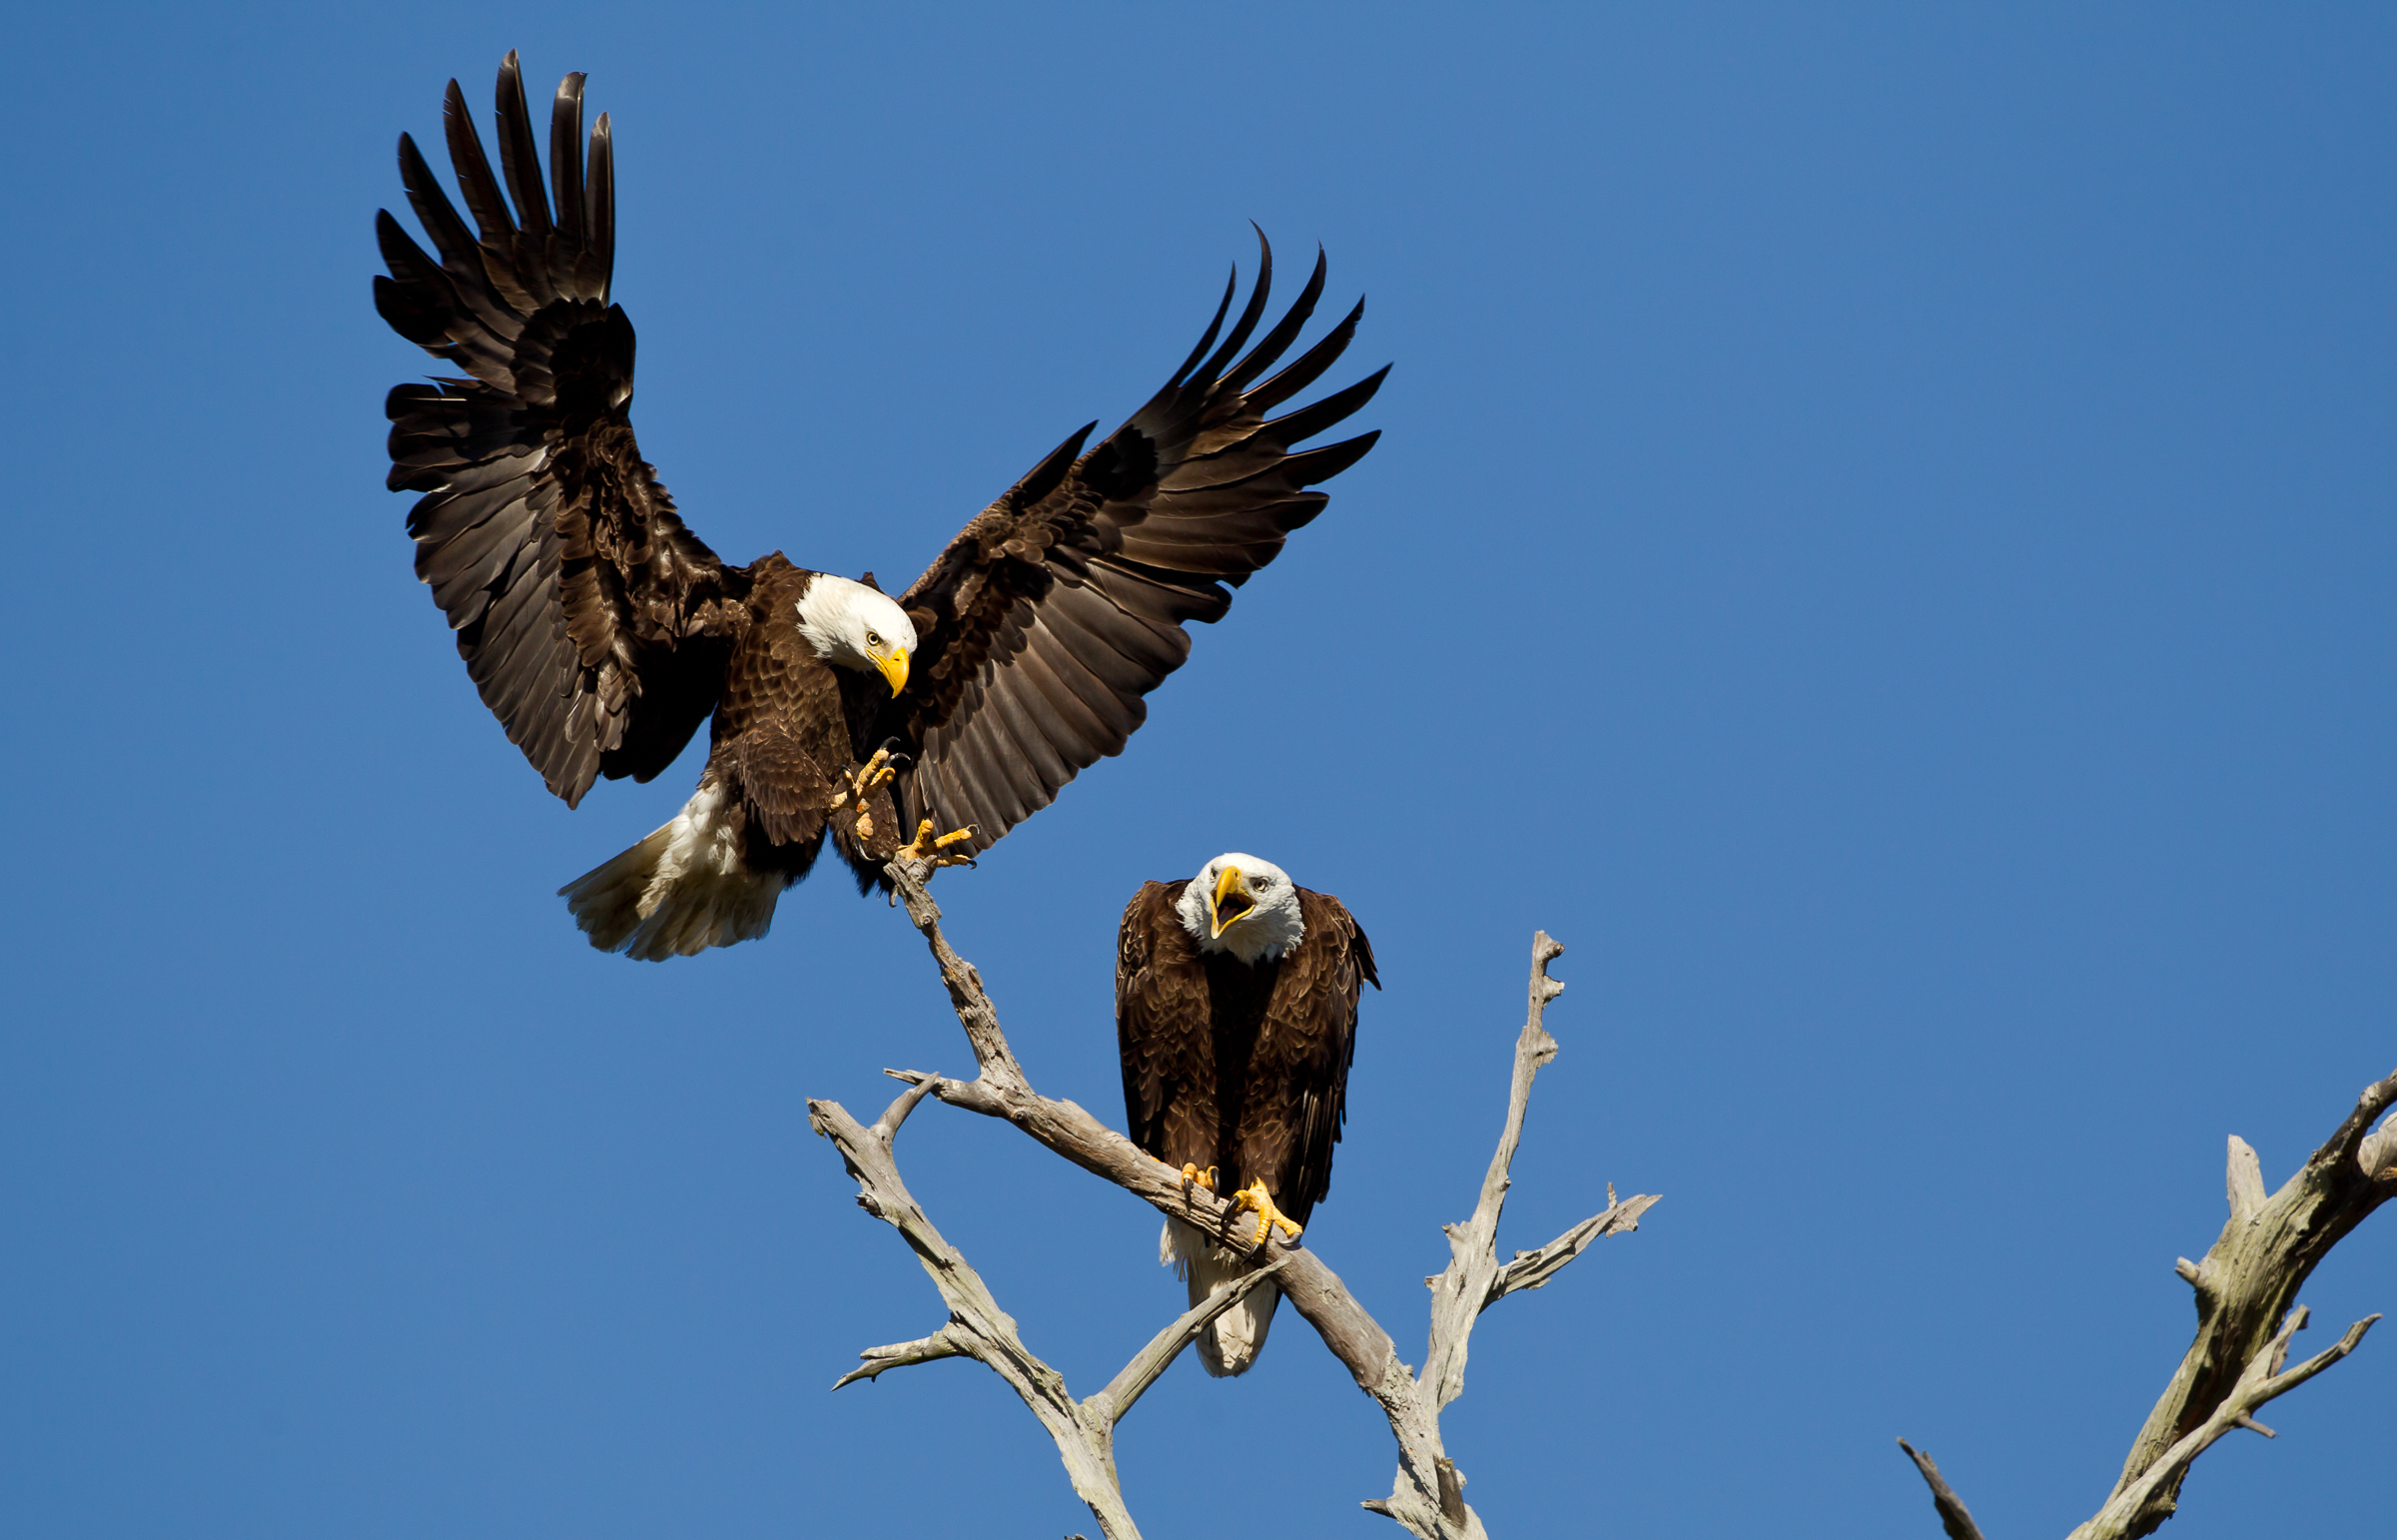 Two Bald Eagles, one perched on a bare tree branch, one just about to land, with sky in the background. Two Bald Eagles, one perched on a bare tree branch, one just about to land, with sky in the background. Photo: Robert Bailey/Audubon Photography Awards.